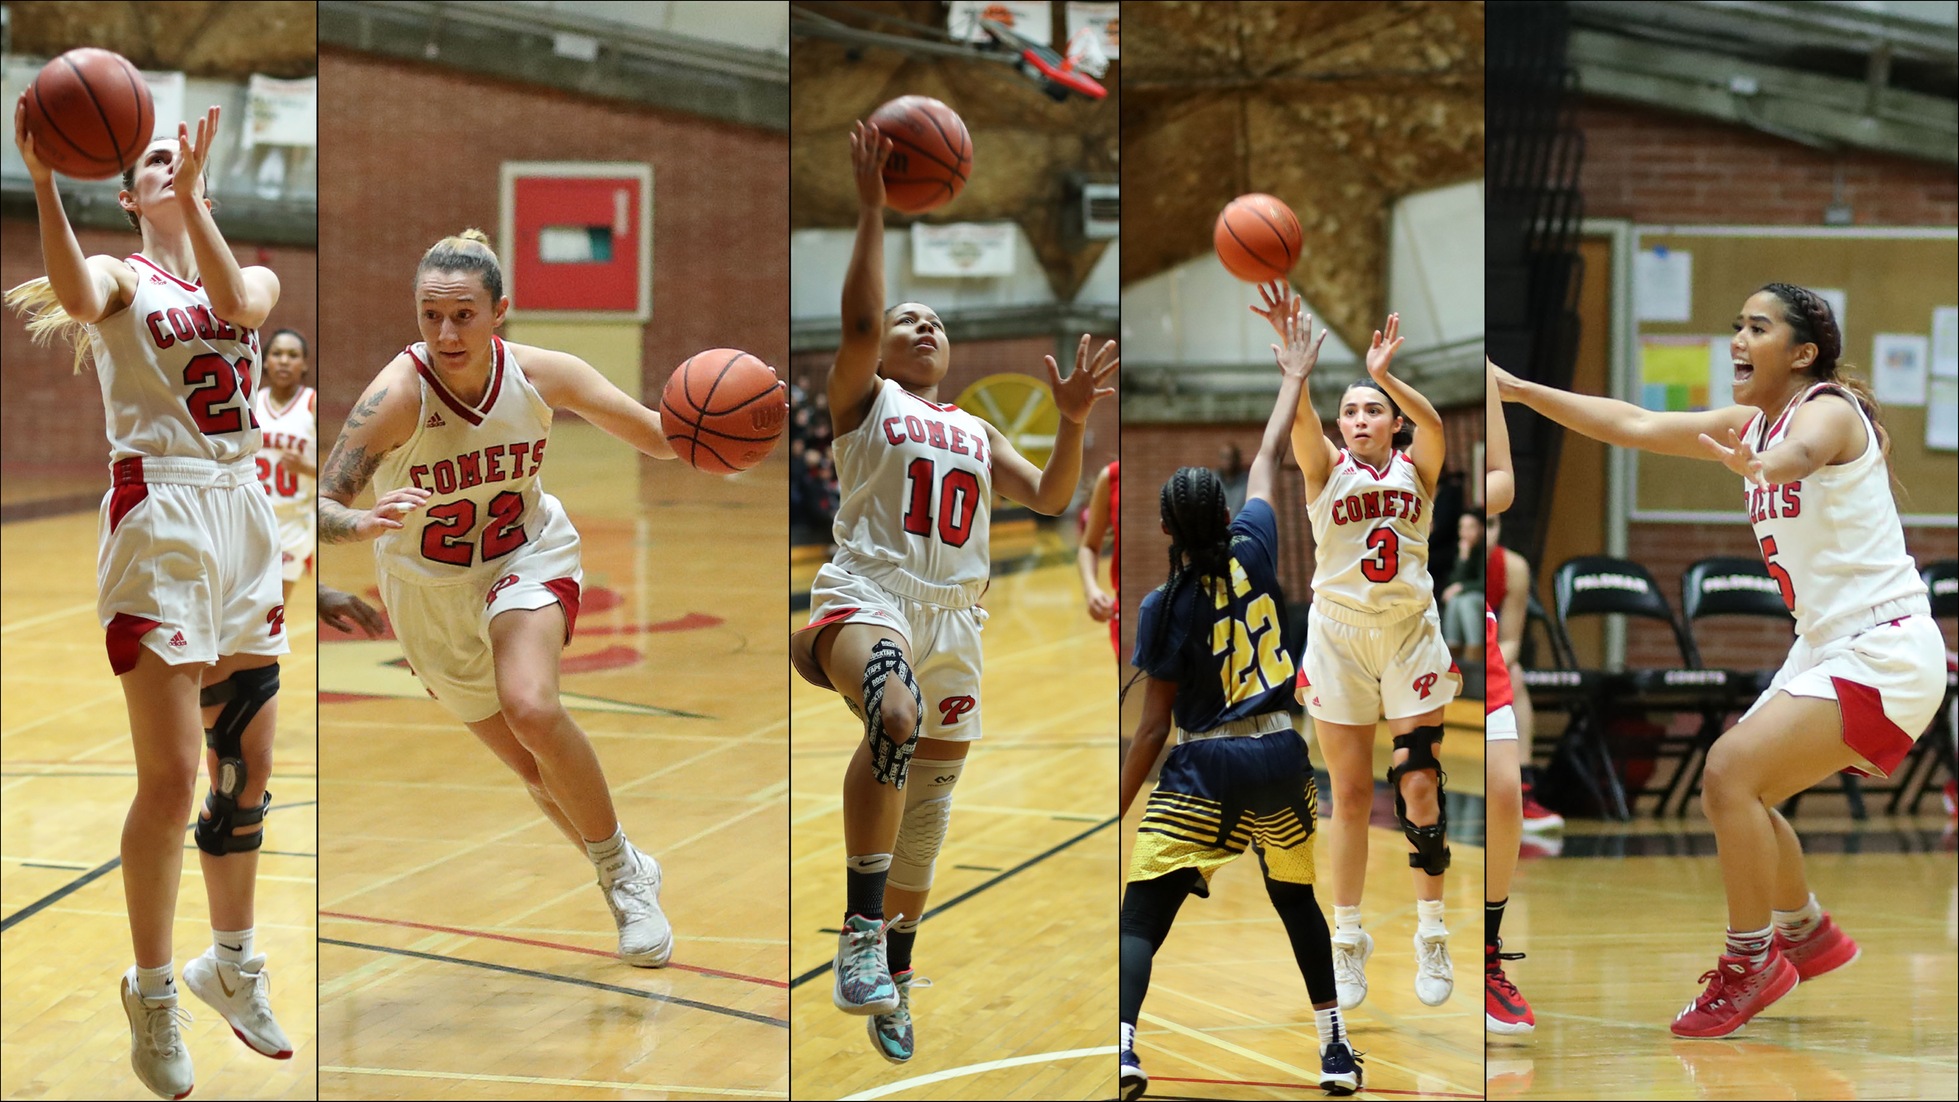 From left: Lilly Crabtree (1st Team), Melena Bland (1st Team), Taylor Williams (2nd team), Nikki Mayoral (1st Team) and Julie Saelee (2nd Team). Photos by Hugh Cox.